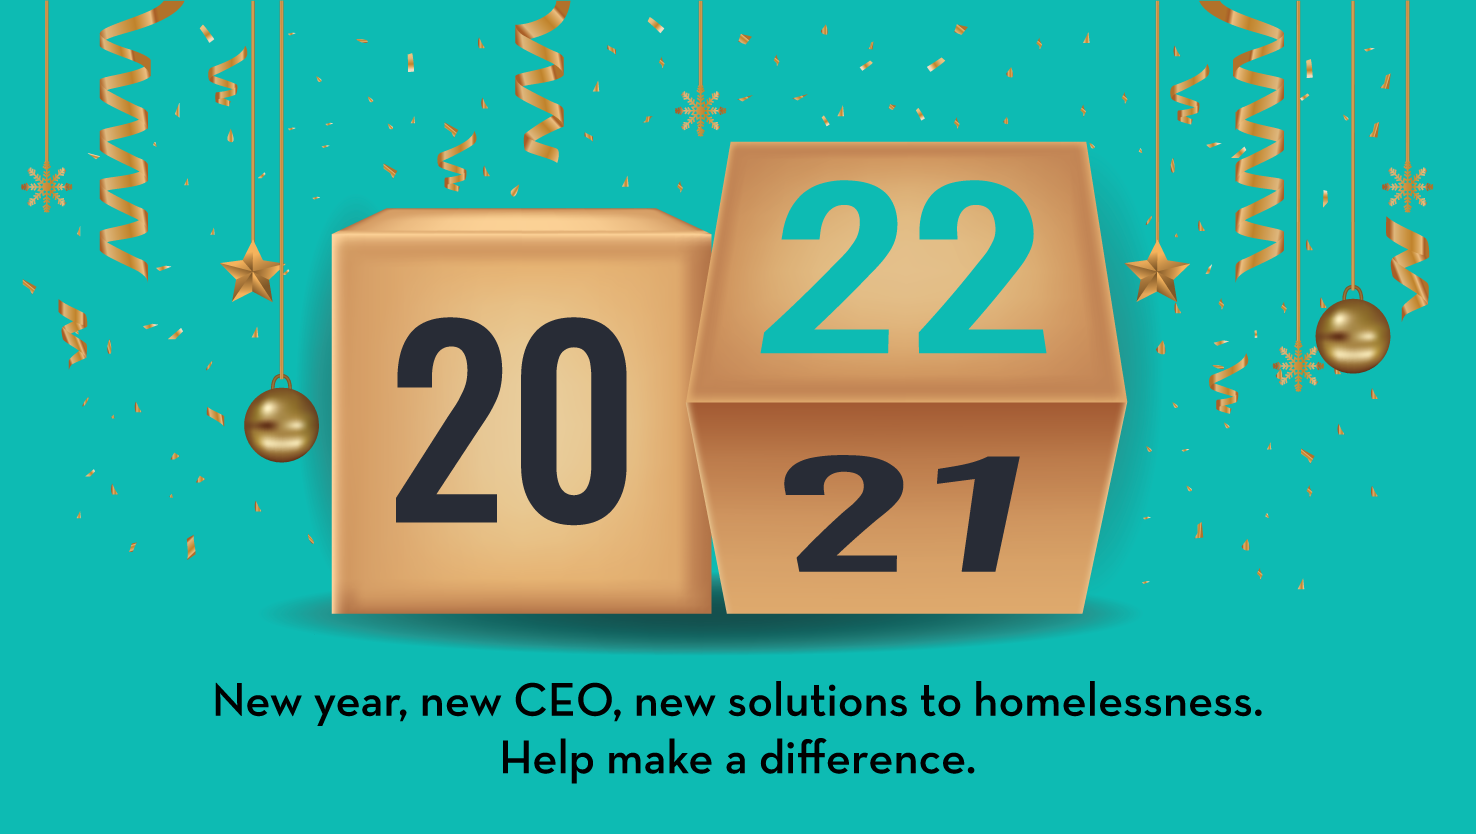 New year, new CEO (Steve Decker), new solutions to homelessness. Help make a difference. Click image to donate.